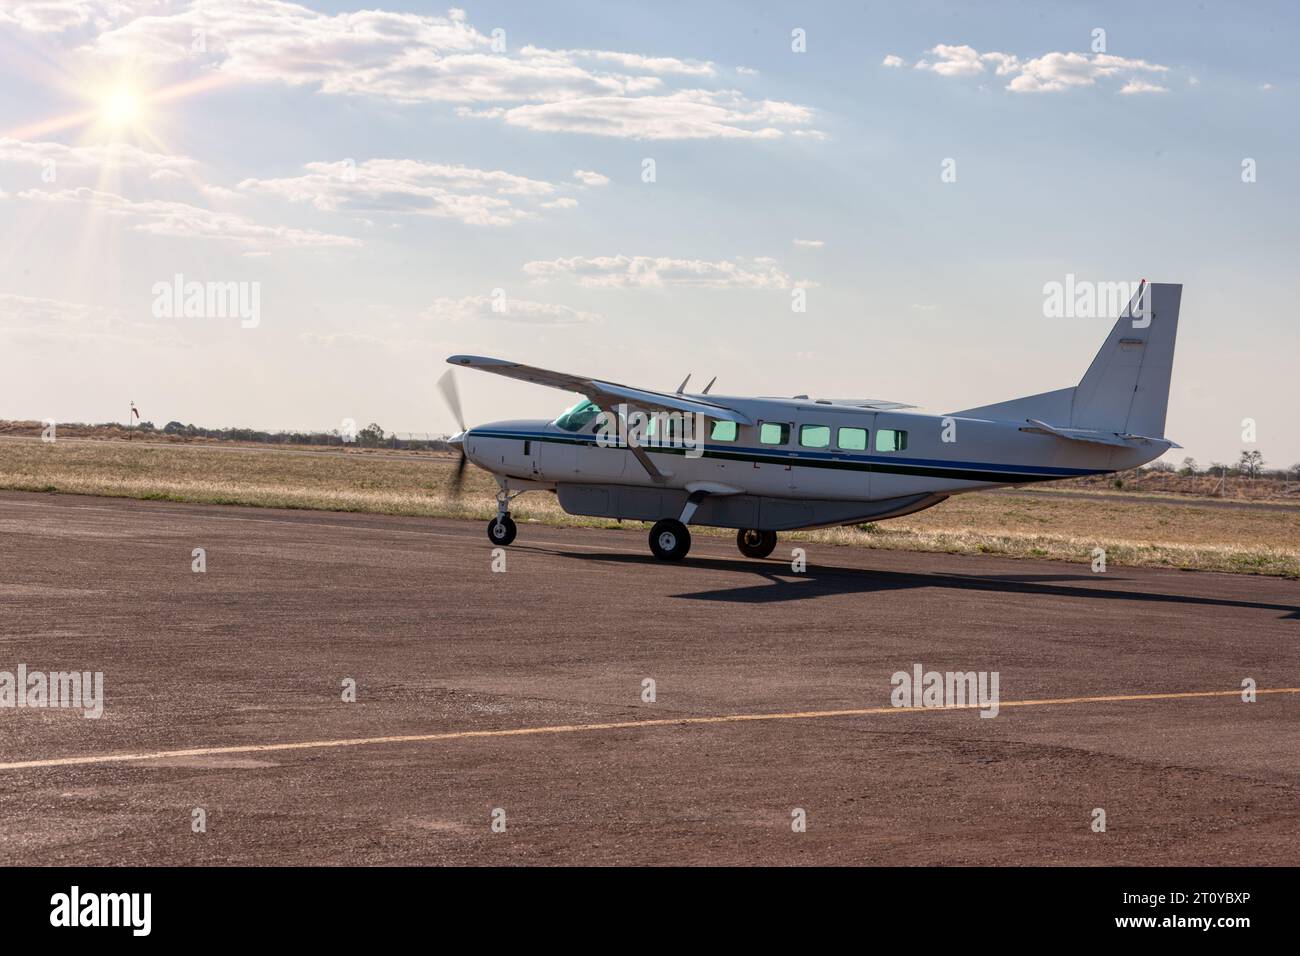 small light aircraft taking off at a small airport in the bush outback Stock Photo